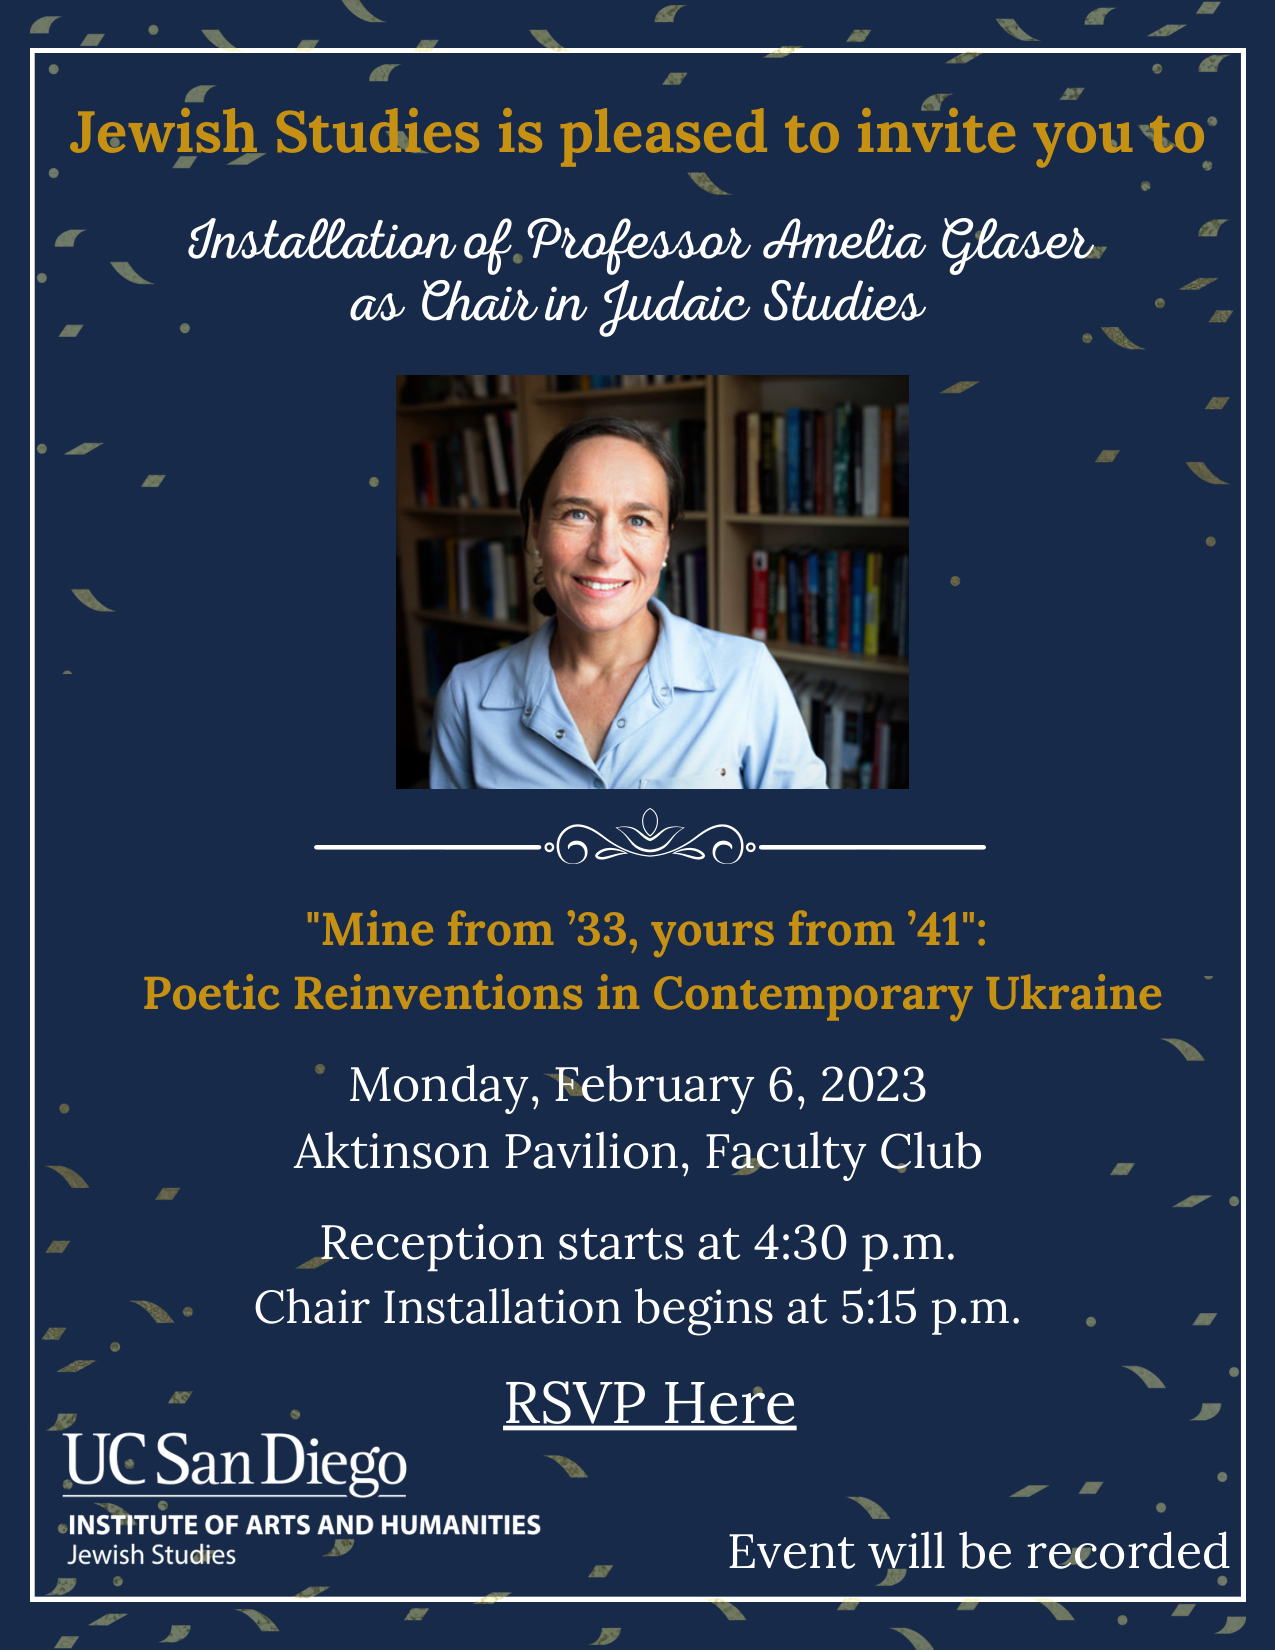 Promotional flyer for the Installation of Professor Amelia Glaser as Chair in Judaic Studies. "Mine from '33, yours from '41": Poetic Reinventions in Contemporary Ukraine. Monday, February 6, 2023, at Aktinson Pavilion, Faculty Club. Reception starts at 4:30 pm, and chair installation begins at 5:15 pm. The event will be recorded.